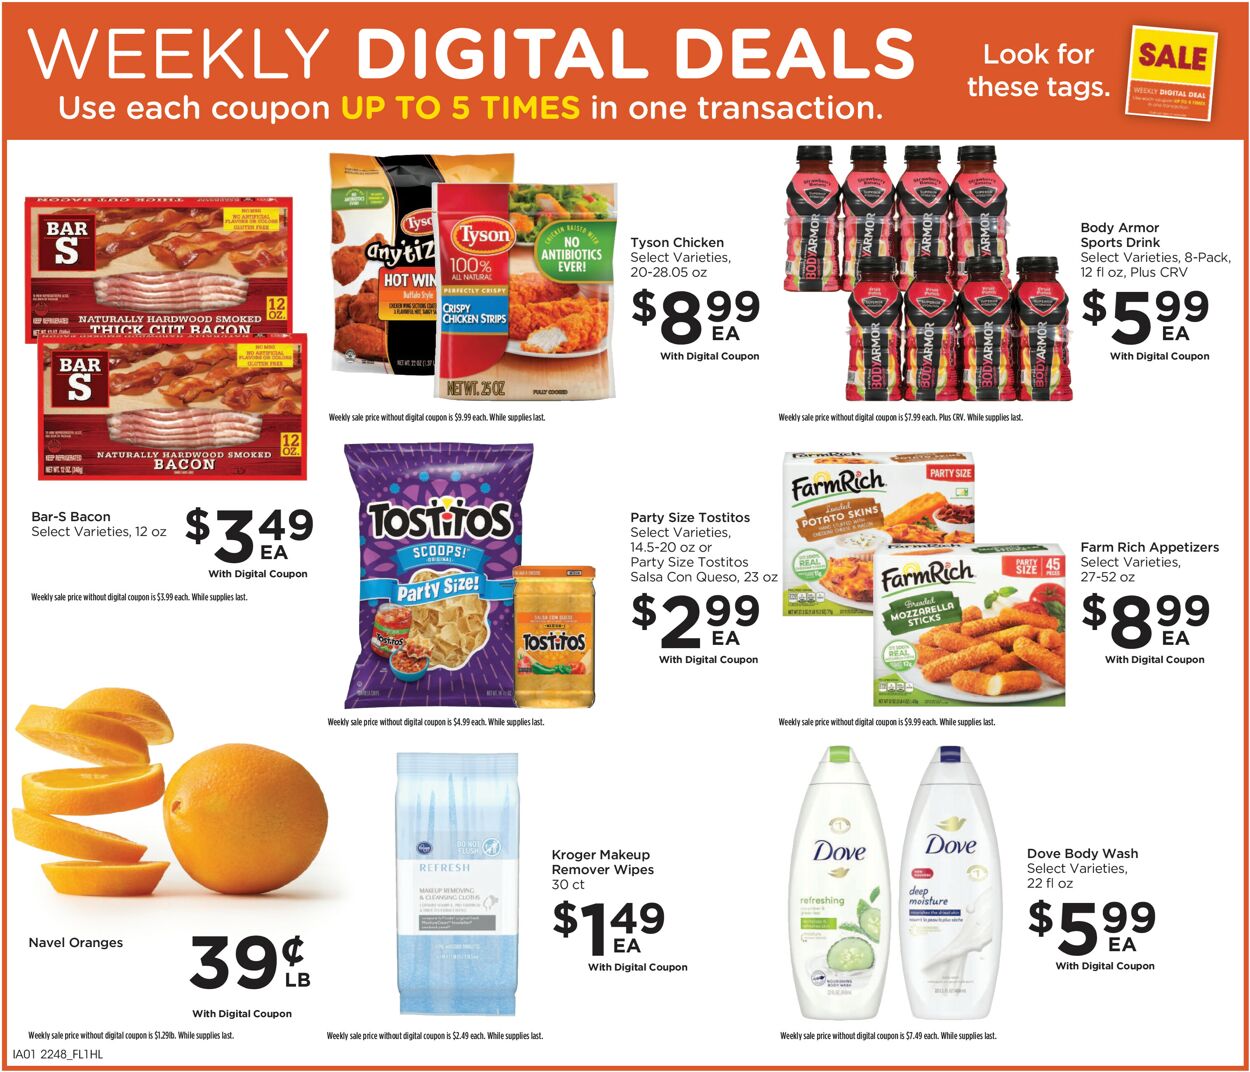 Catalogue Food 4 Less from 12/28/2022